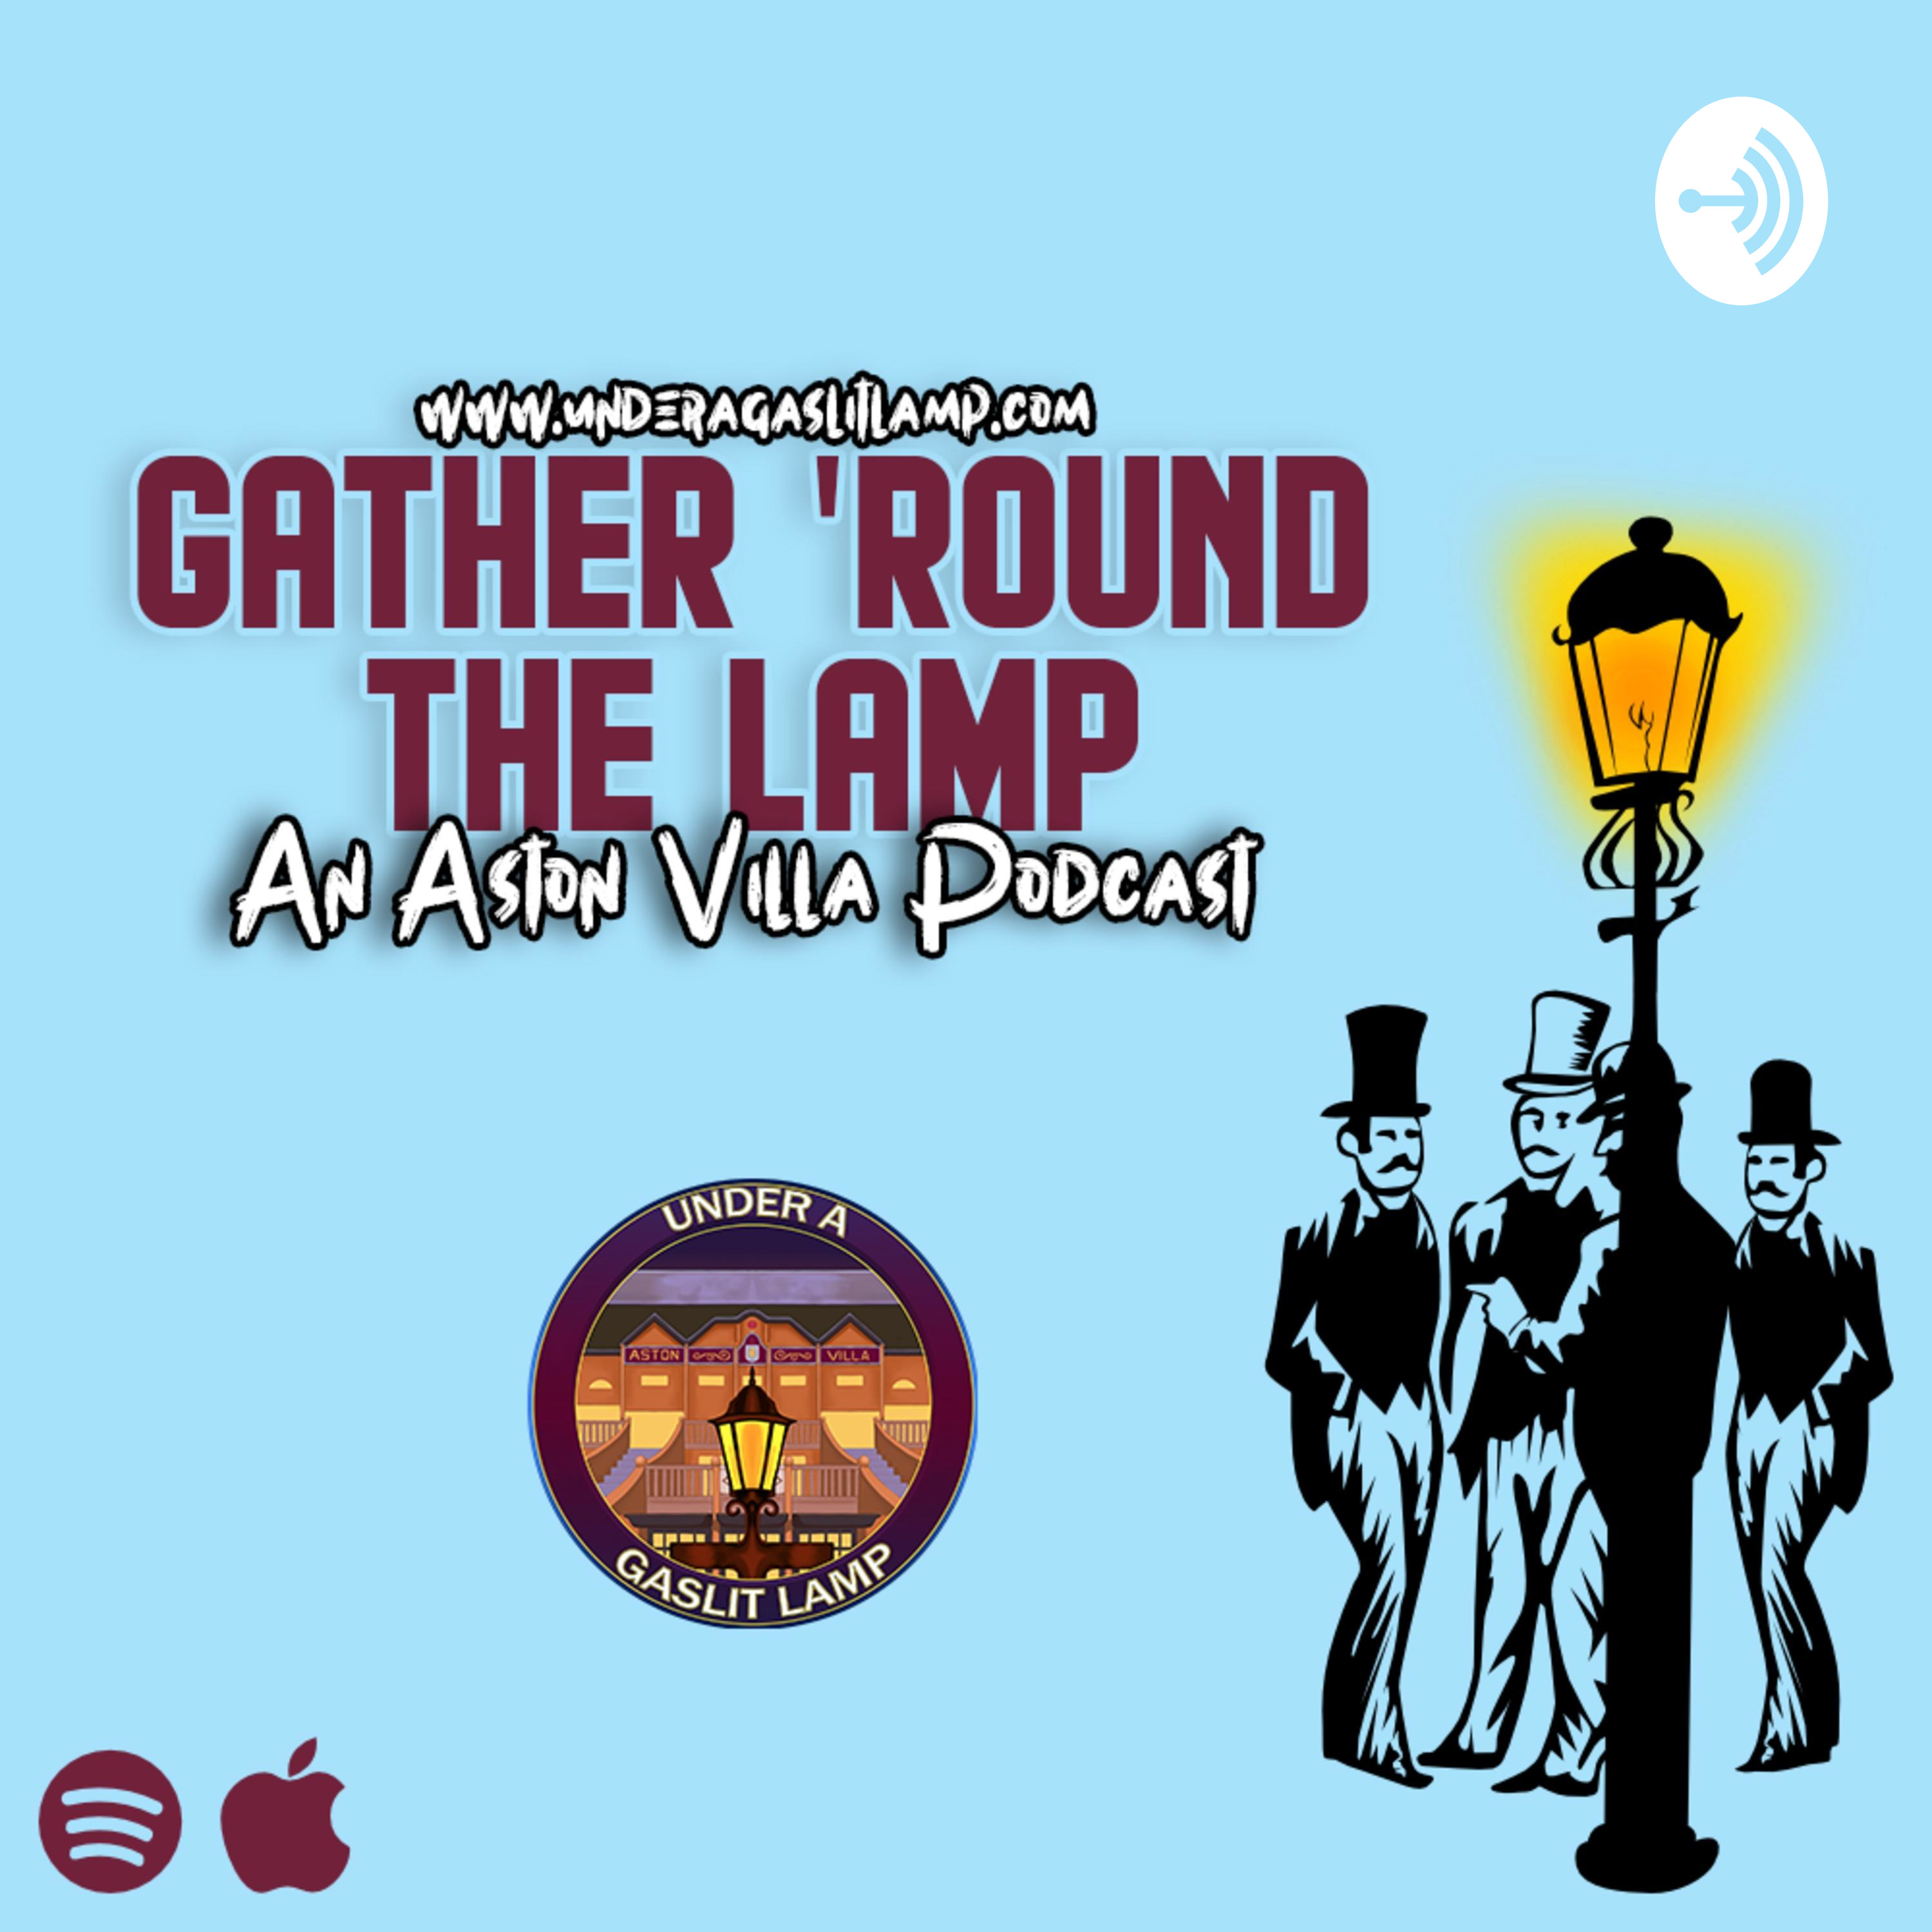 Gather ’Round The Lamp S4 E1 - Here We Go Again